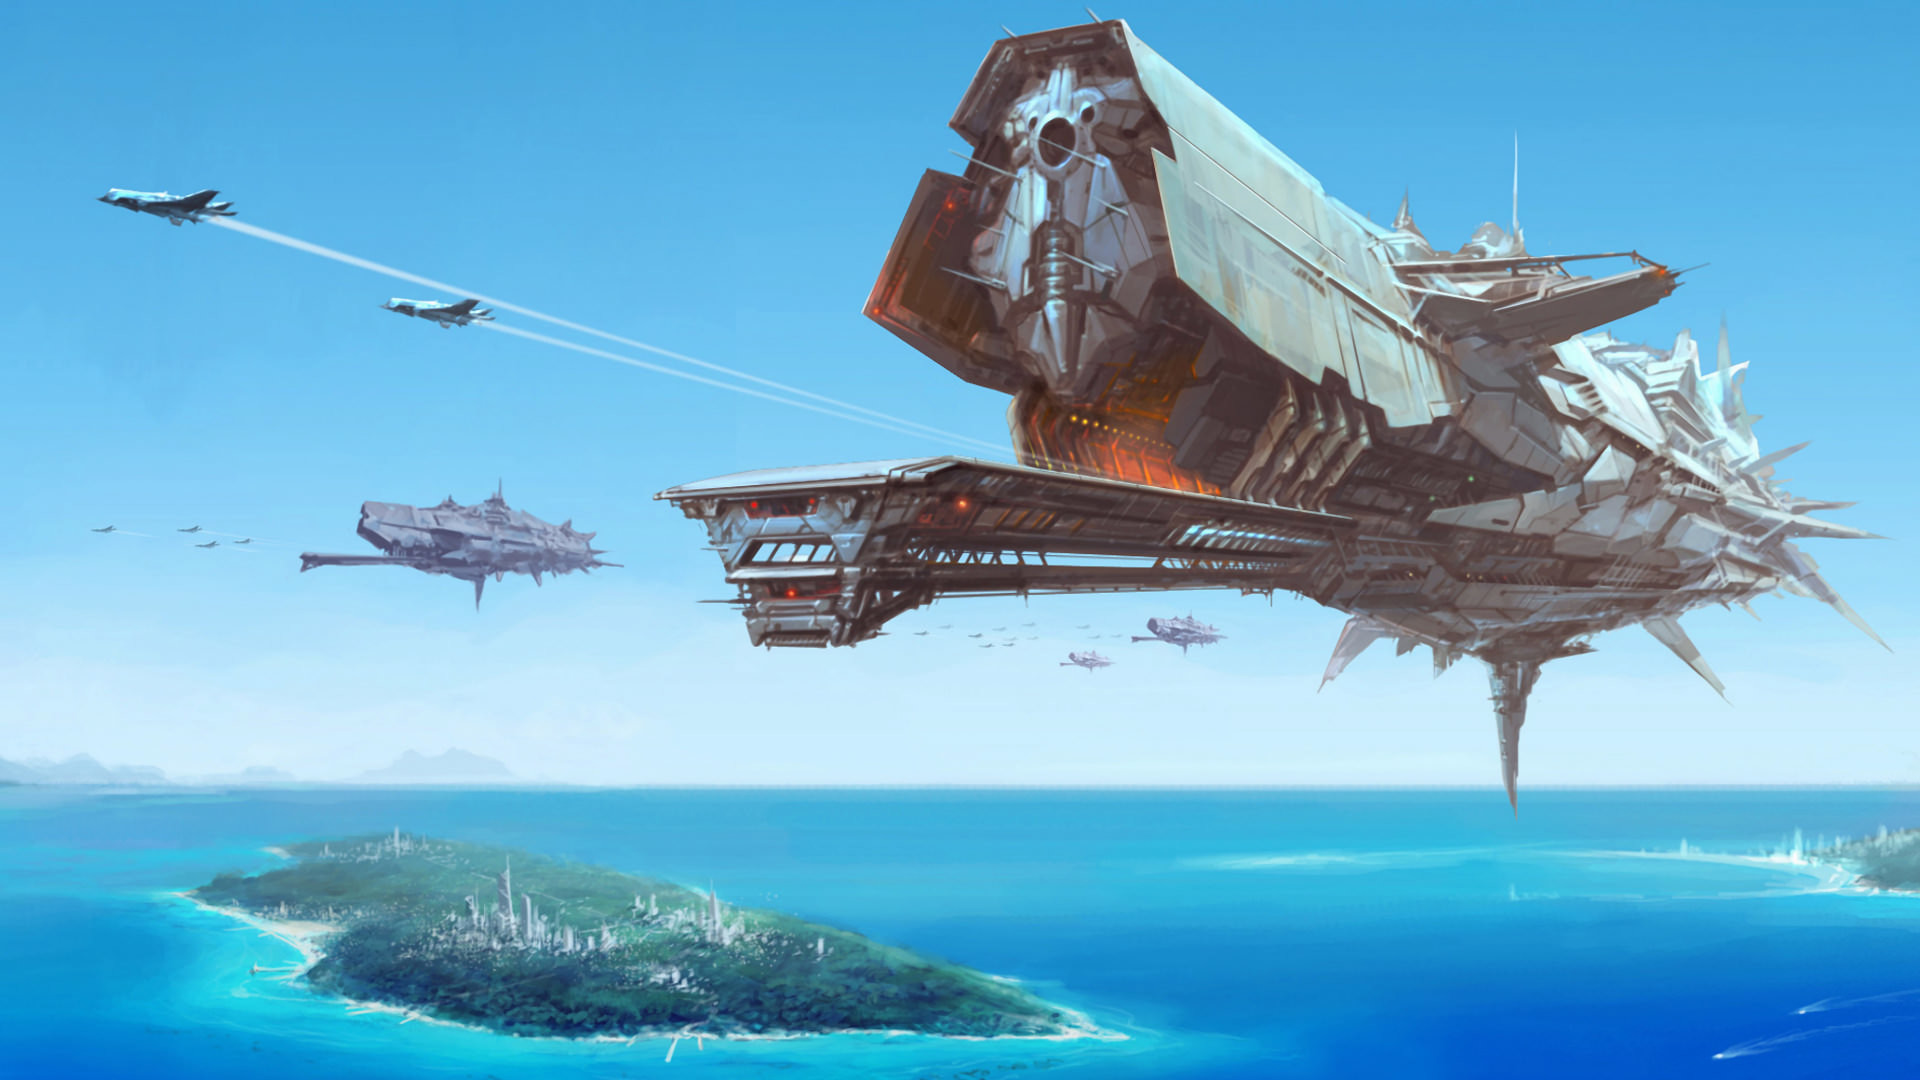 1920x1080 Sci-Fi Battle Space Ship Wallpaper - 1920 x Impressive digital painting of  a enormous battle space ship flying over a futuristic city island.